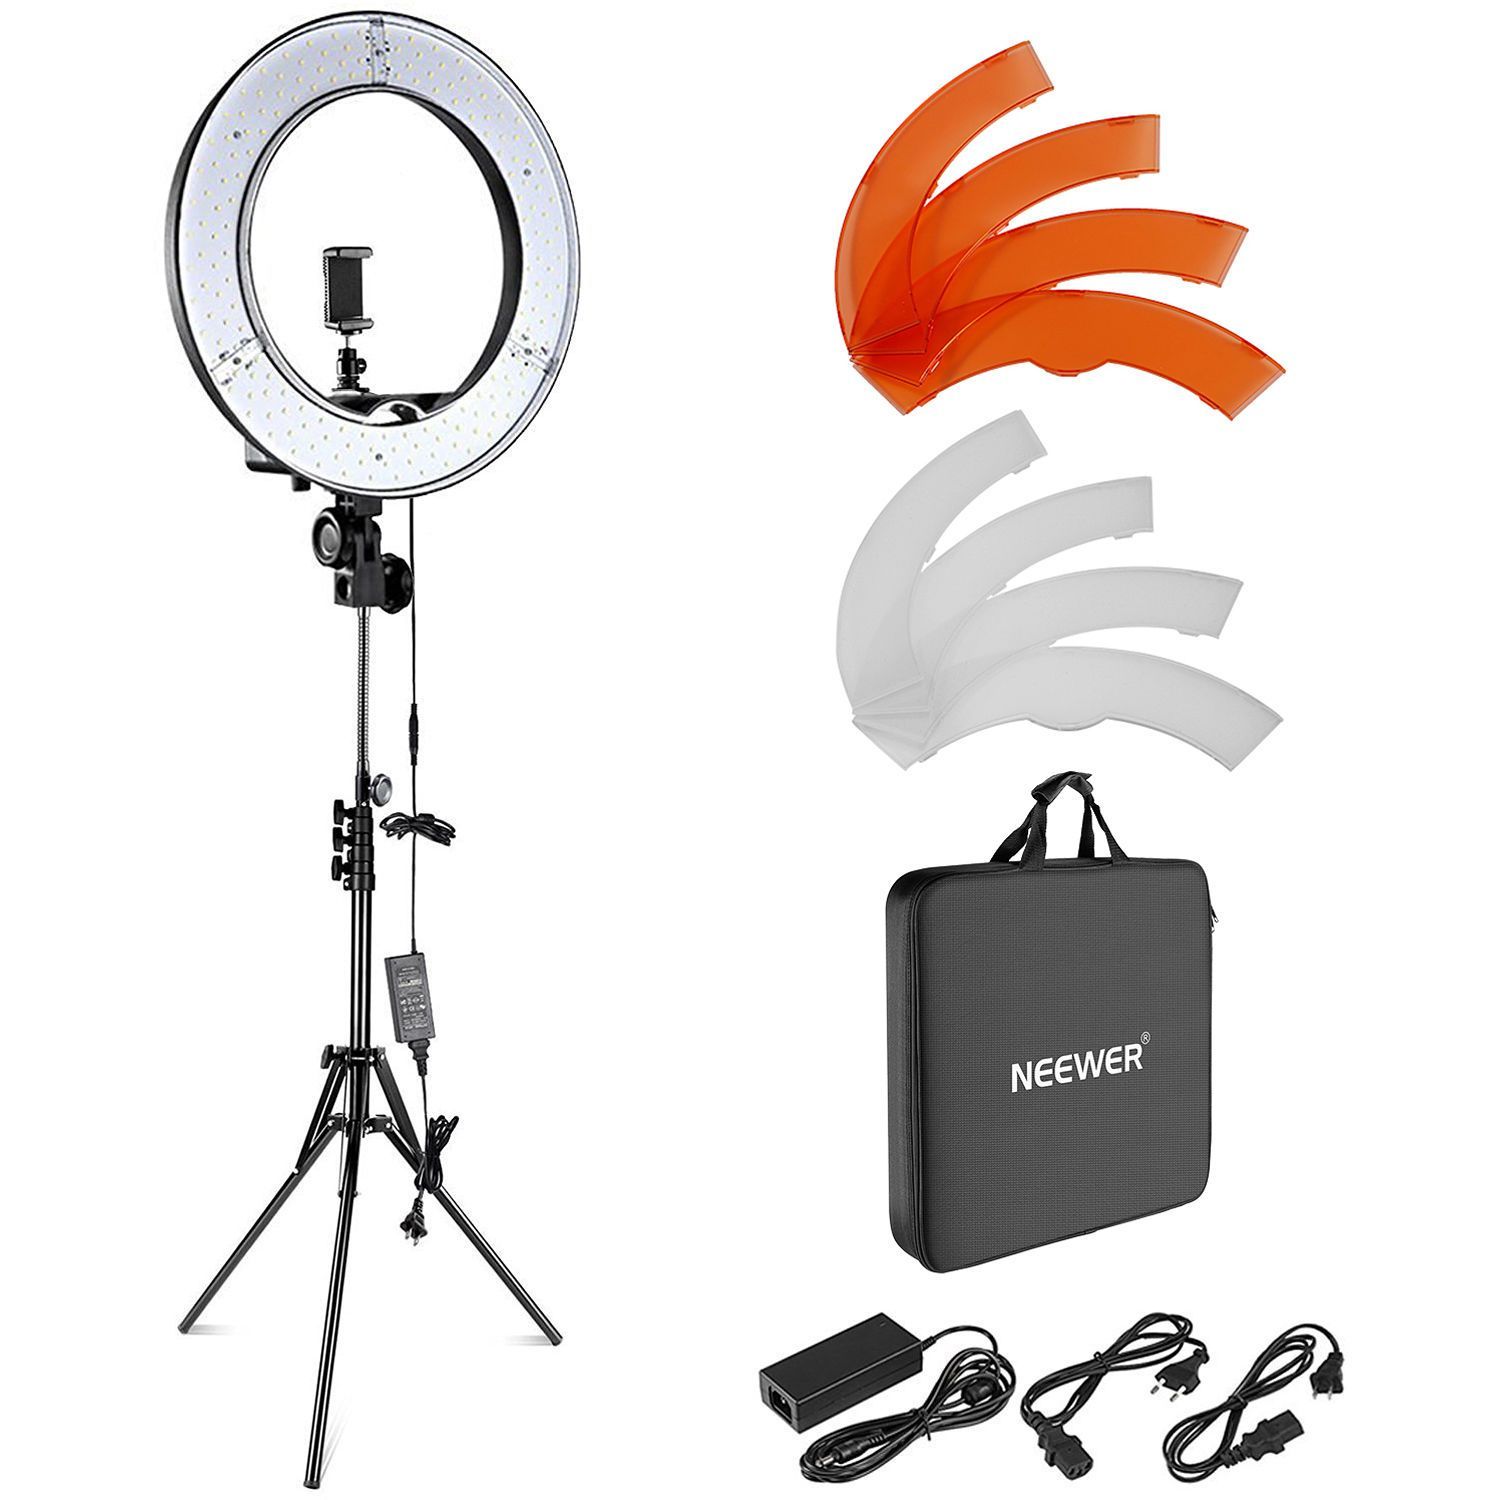 1633616368 neewer 10088612 18 ring light with 1398777 1633616363